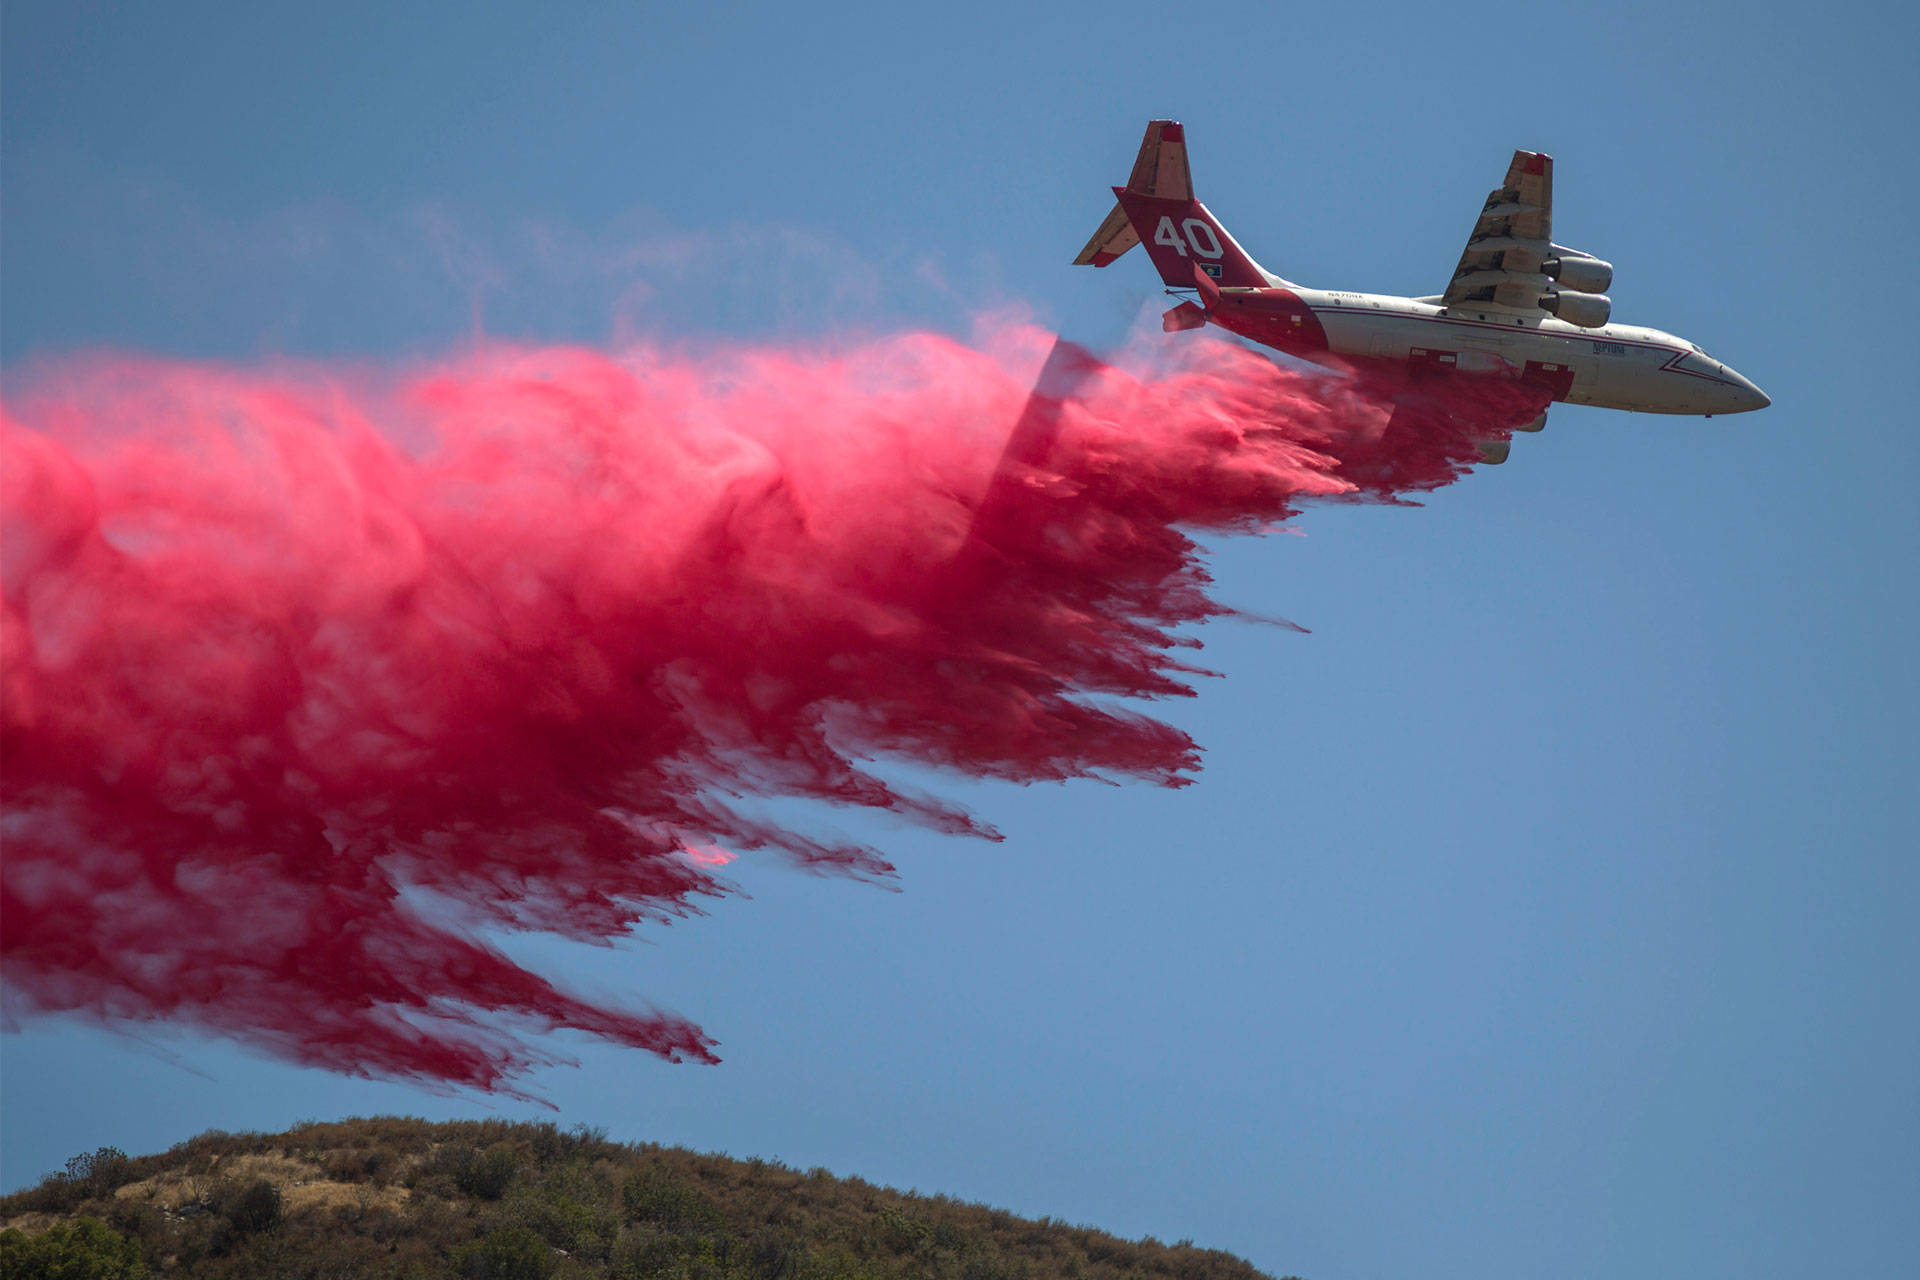 A firefighting air tanker drops fire retardant on the Sand Fire in Placerita Canyon on July 25, 2016 in Santa Clarita. David McNew/Getty Images